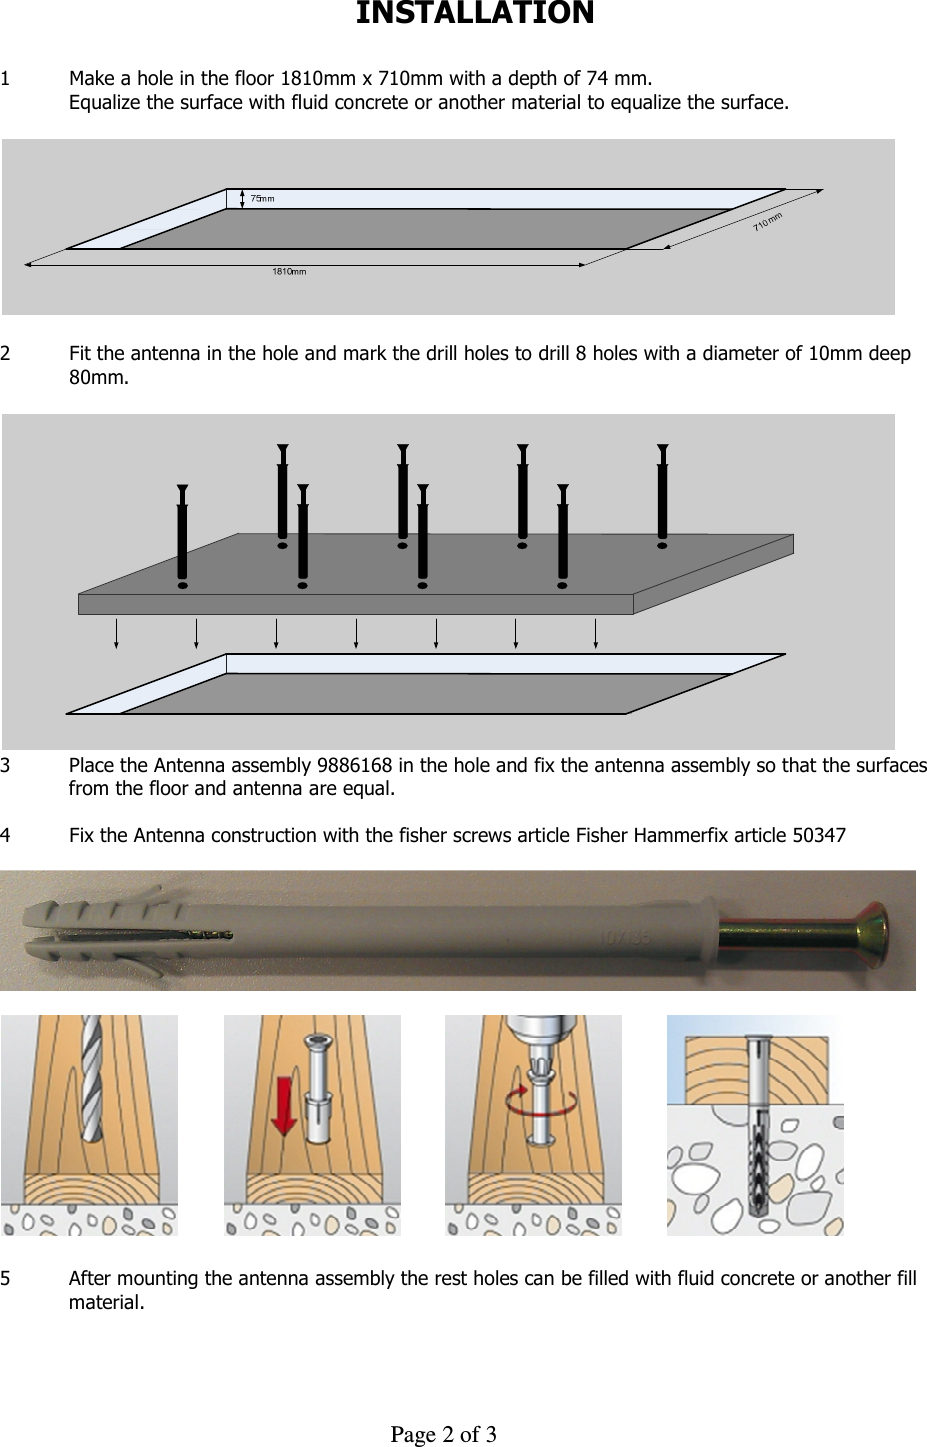     Page 2 of 3    INSTALLATION  1  Make a hole in the floor 1810mm x 710mm with a depth of 74 mm. Equalize the surface with fluid concrete or another material to equalize the surface.    2  Fit the antenna in the hole and mark the drill holes to drill 8 holes with a diameter of 10mm deep    80mm.    3  Place the Antenna assembly 9886168 in the hole and fix the antenna assembly so that the surfaces from the floor and antenna are equal.  4  Fix the Antenna construction with the fisher screws article Fisher Hammerfix article 50347      5  After mounting the antenna assembly the rest holes can be filled with fluid concrete or another fill material.  